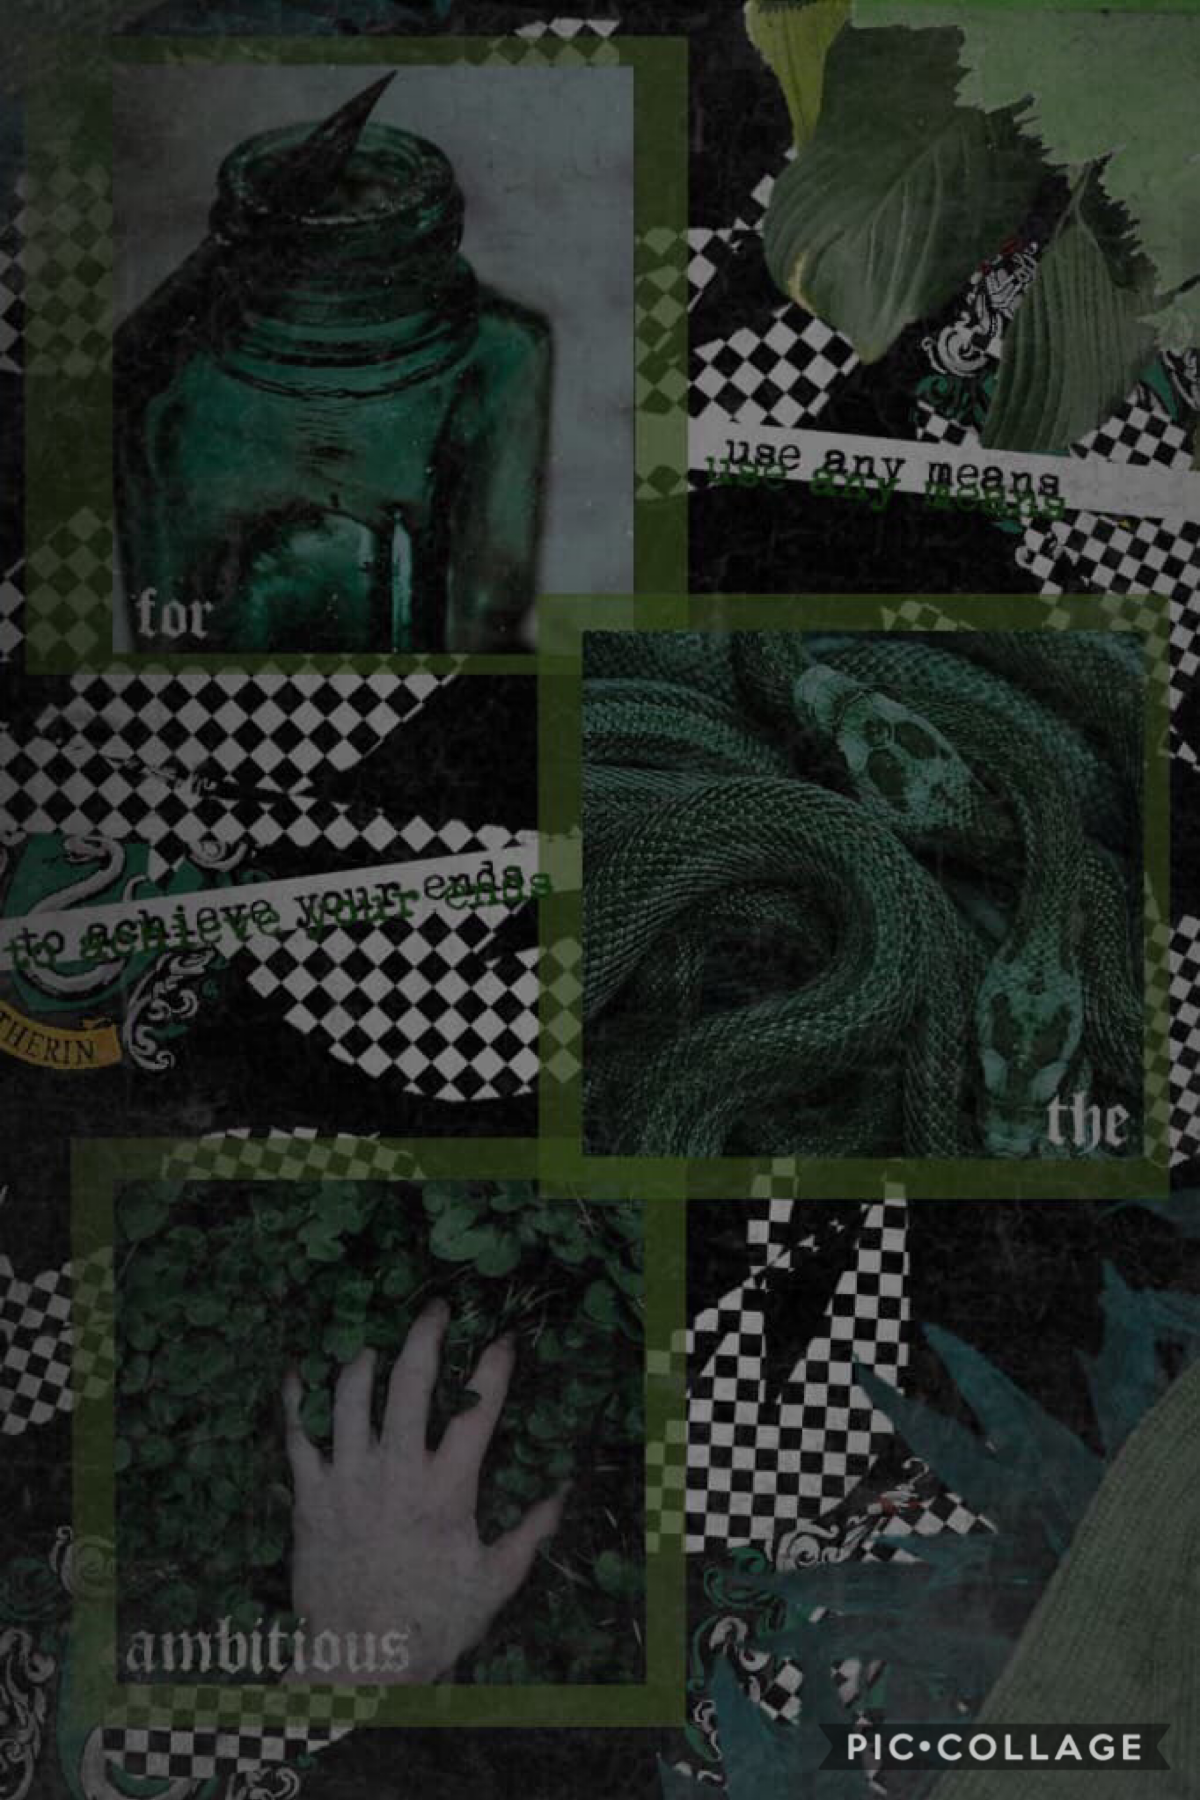 Hola
It’s me, Jordan
And I like Slytherin collages waaaaay too much


A girl told me today that she had a massive crush on me last year and adhsjdhshjs
I’m so fudging oblivious
This is the second time this has happened, too
